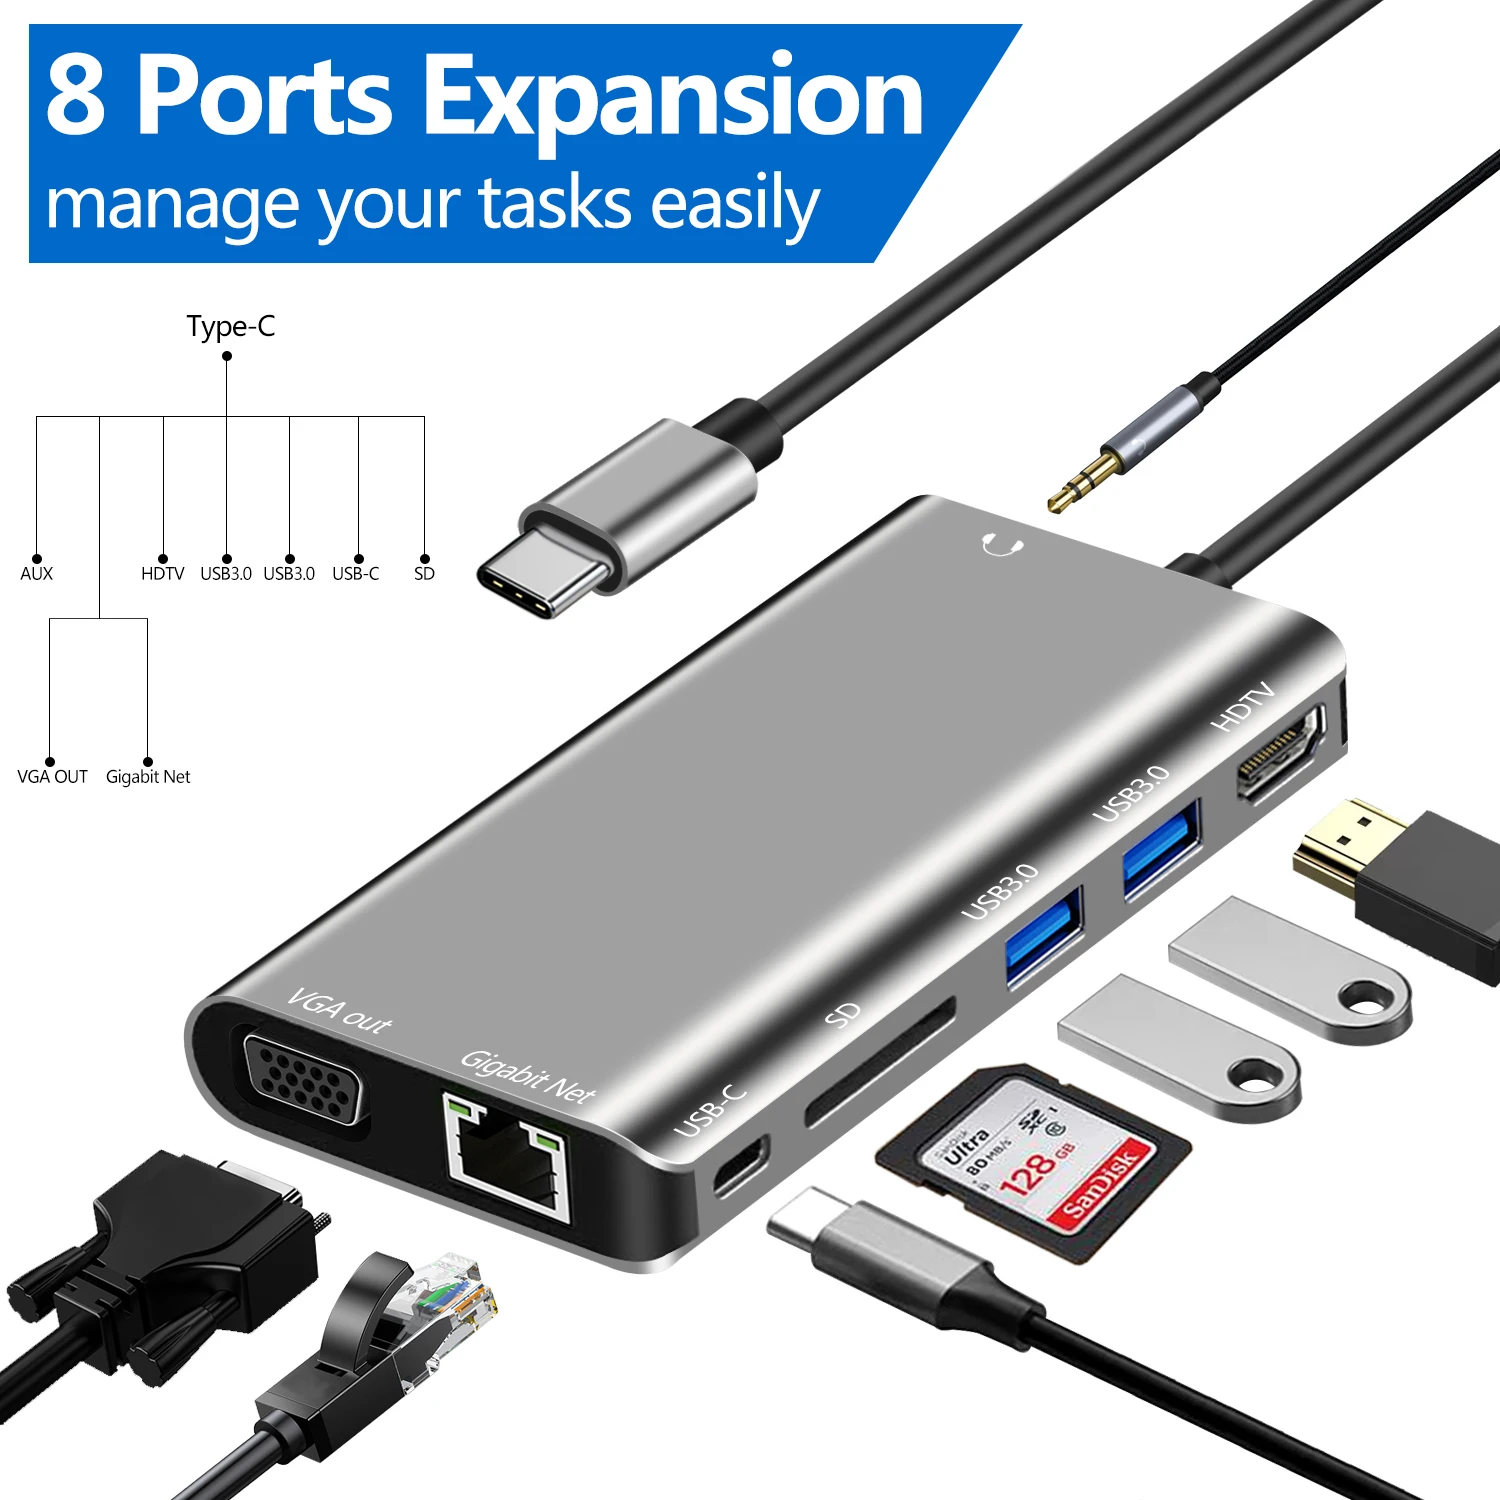 

8 in 1 USB Type C Adapter HUB with HDMI 4K PD Gigabit Ethernet VGA USB3.0 Mic/Audio SD/TF Ports Expander for MacBook Pro Windows